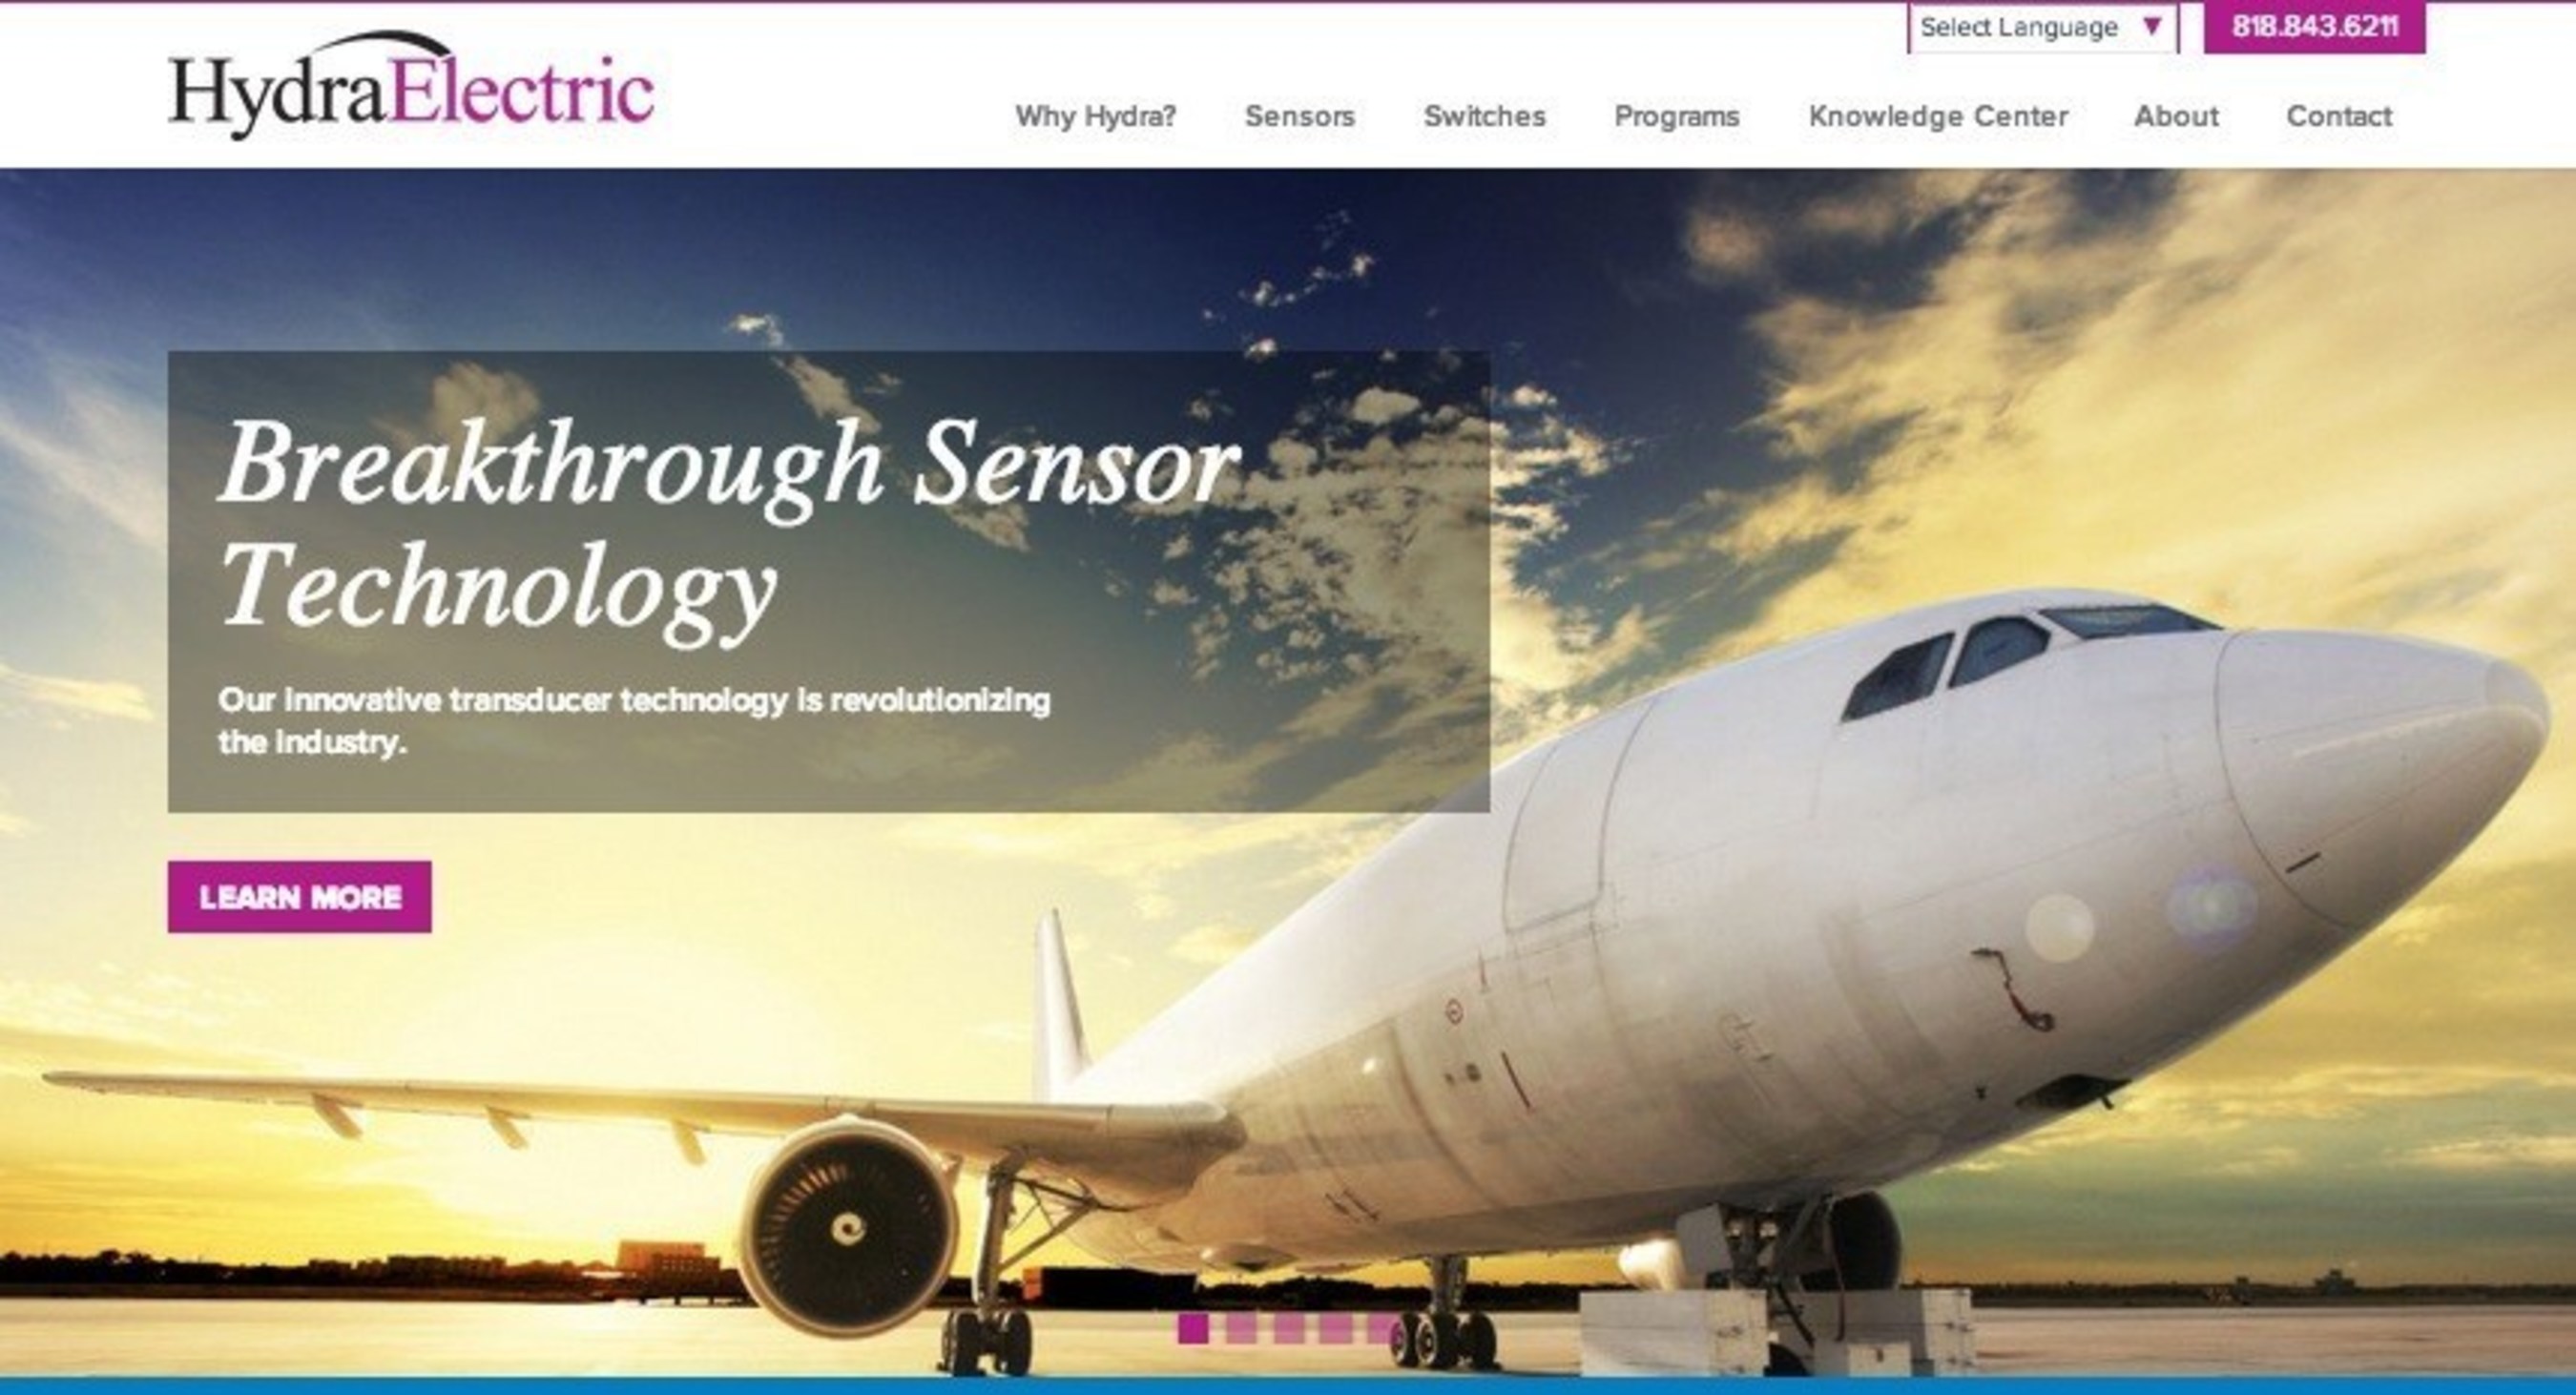 Aerospace innovator Hydra-Electric launches a website redesign showcasing its breakthrough technology in sensors and switches. The site features a responsive design, streamlined navigation, and a new Knowledge Center offering aerospace professionals white papers, articles, case studies and industry news.